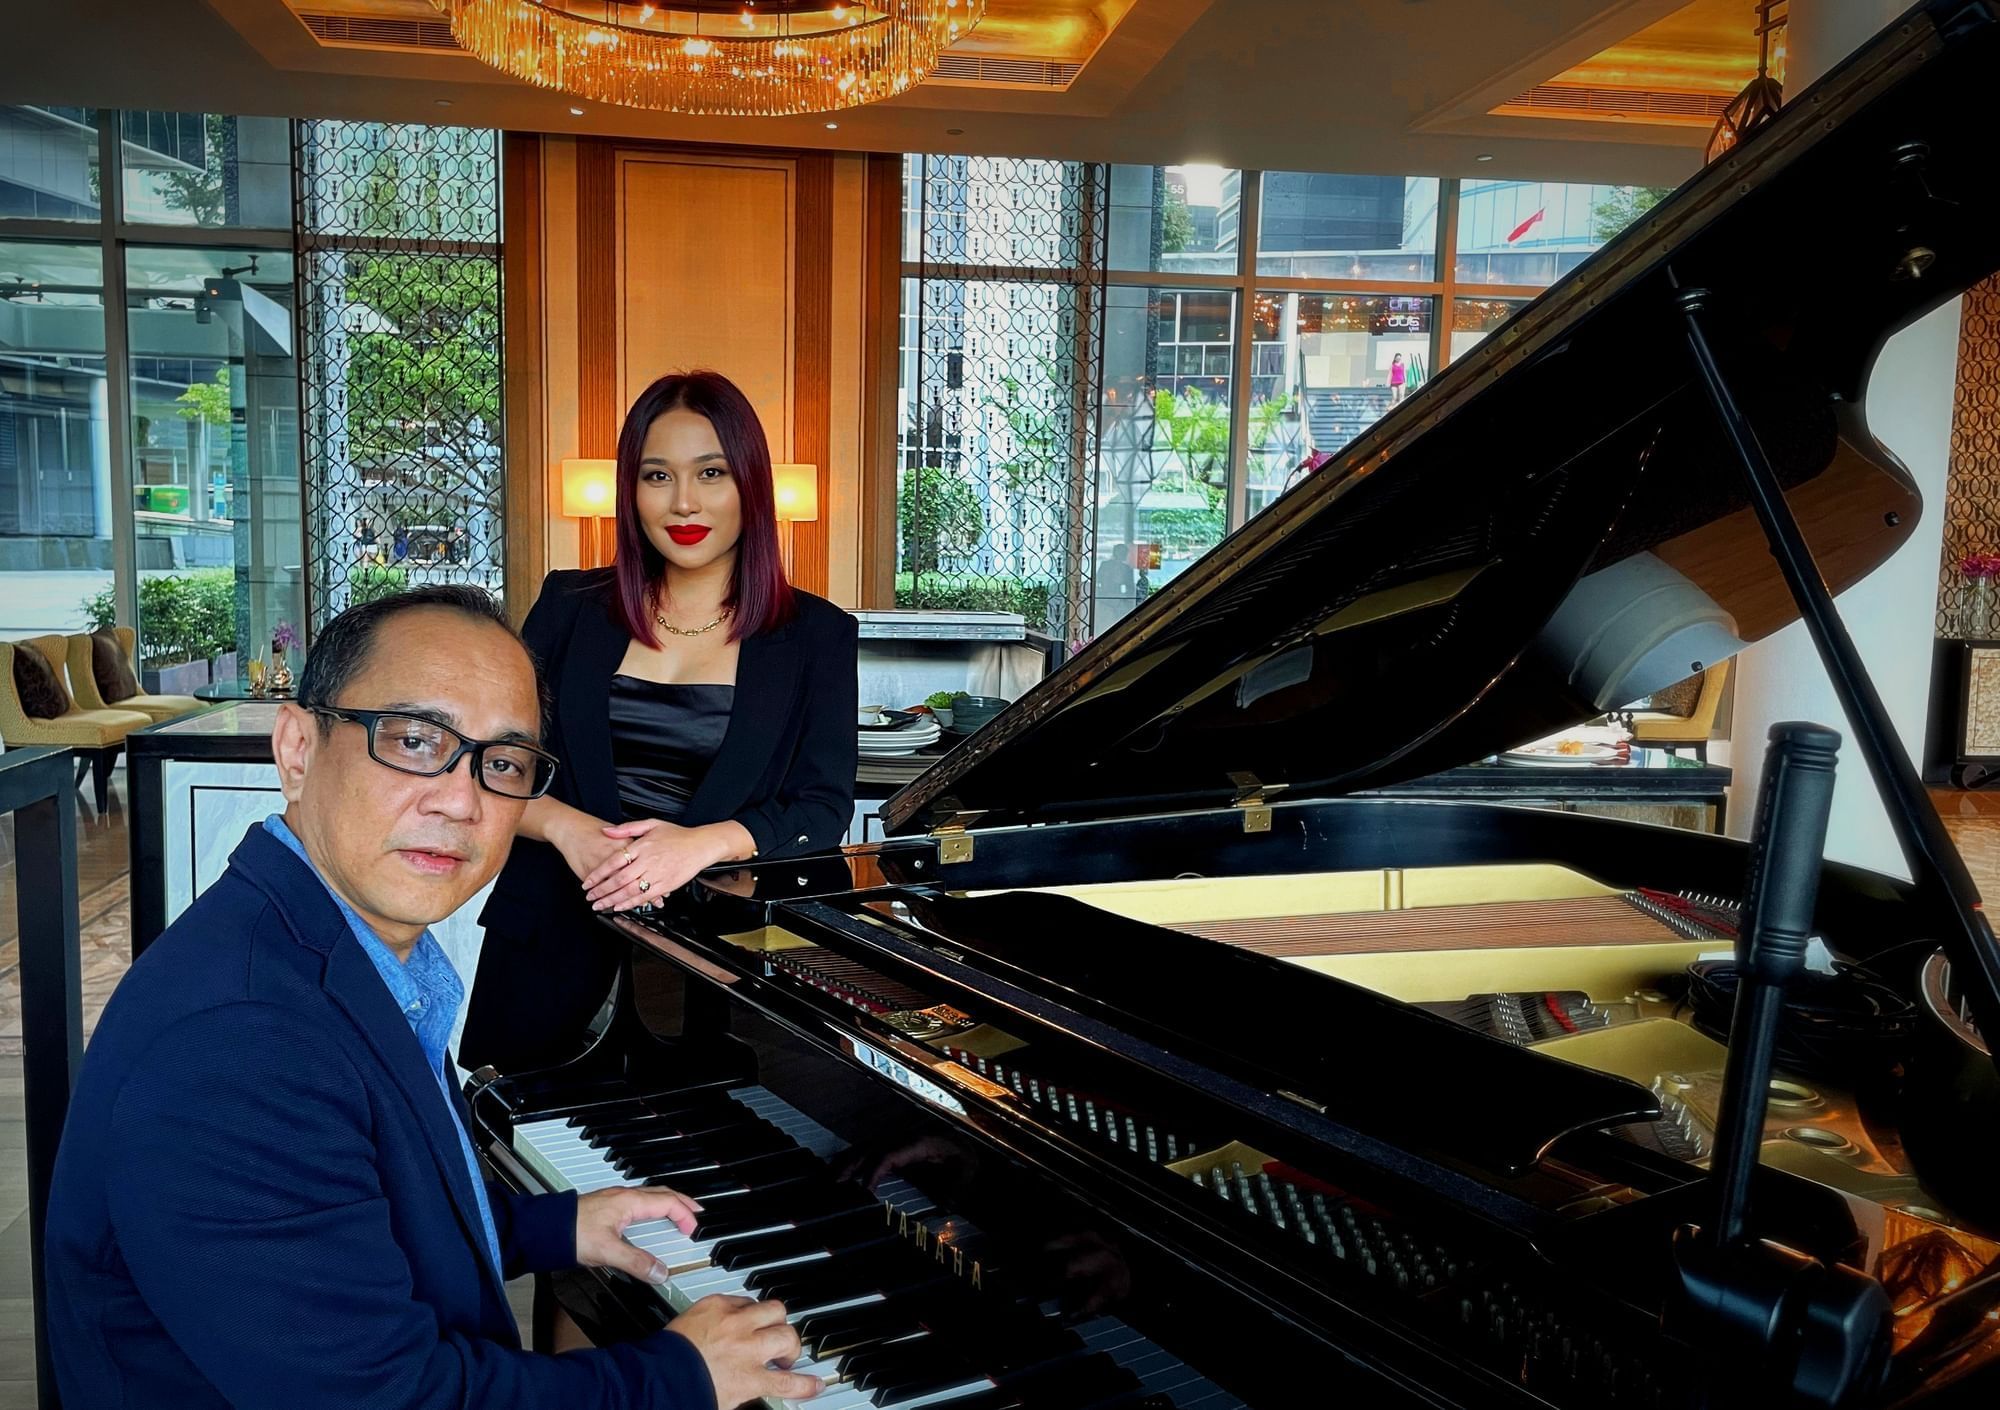 Amor (pianist) and Marjorie (vocalist) posing for a photo at Fullerton Bay Singapore